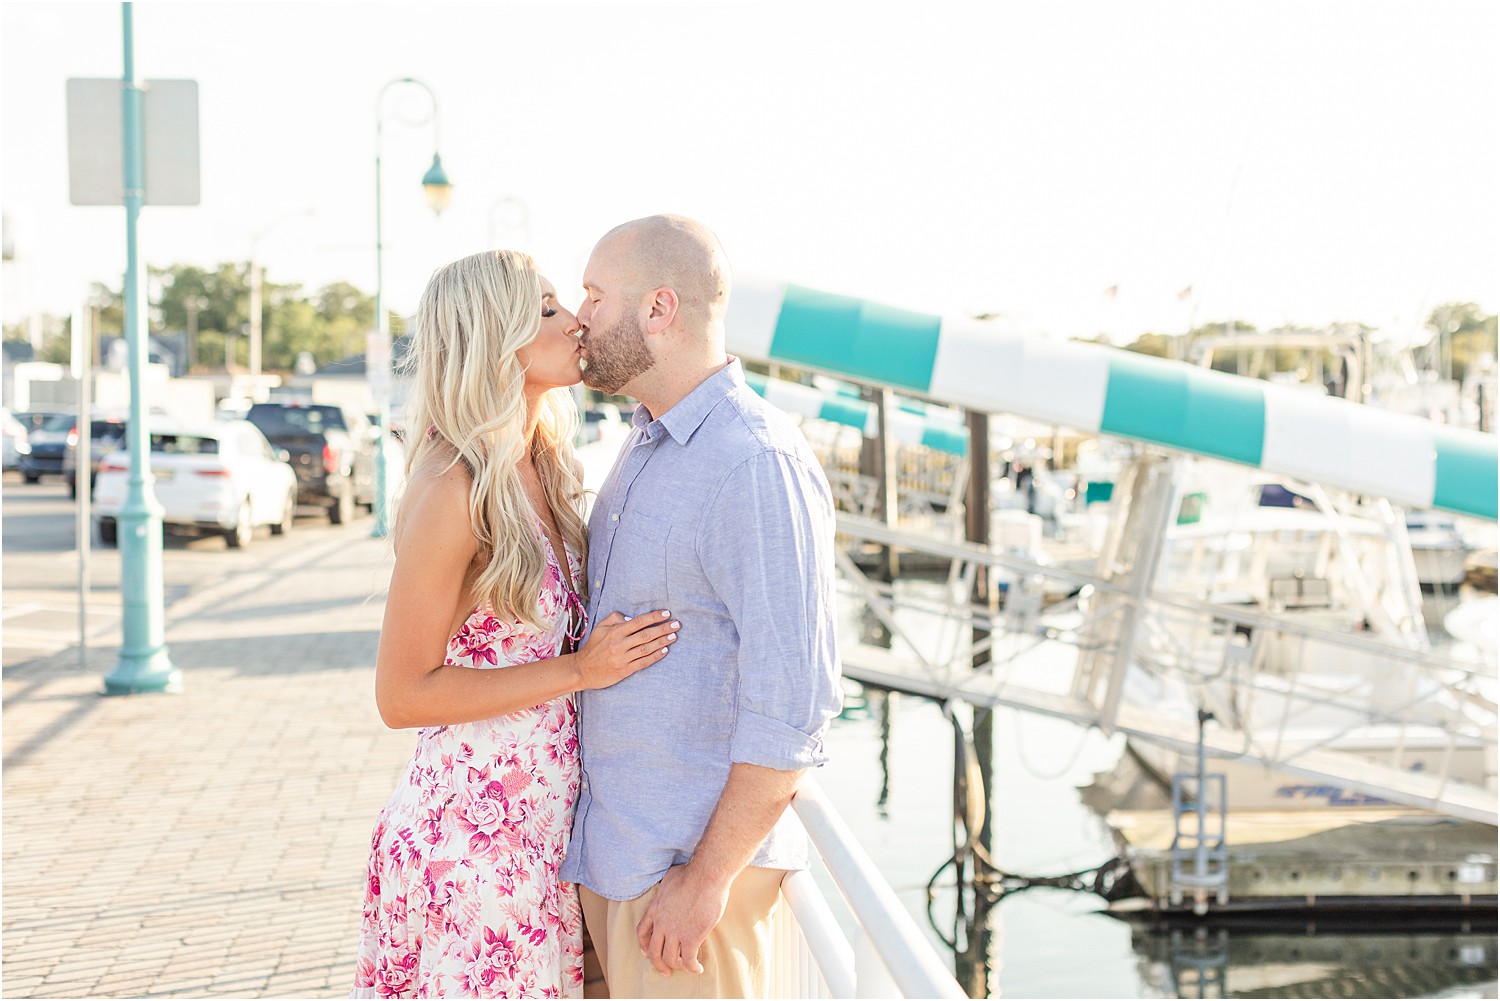 NJ couple kiss at NJ Marina and beach during engagement session